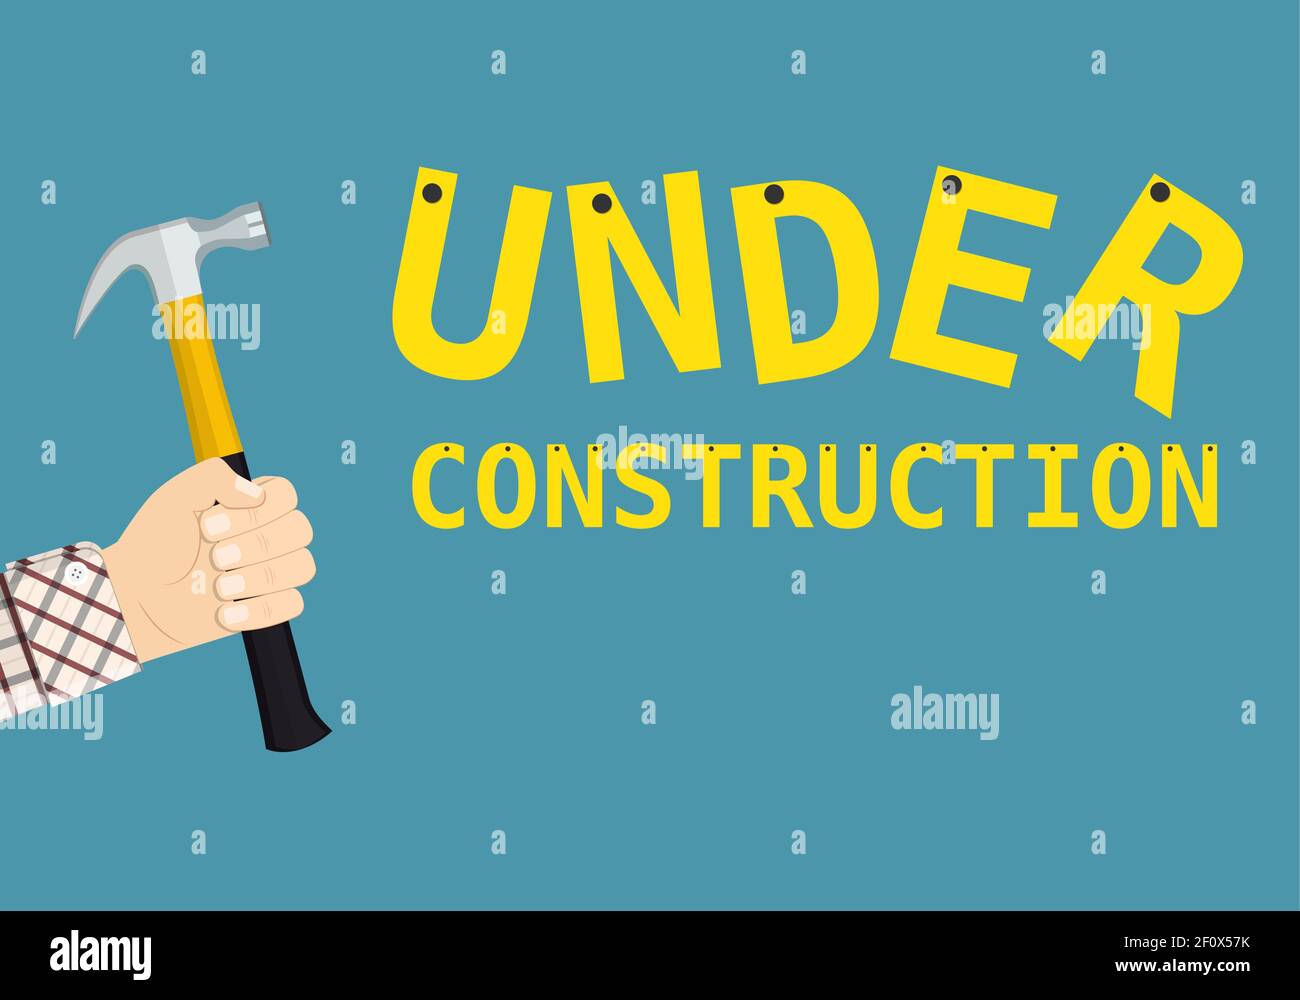 Under construction page sign Stock Vector